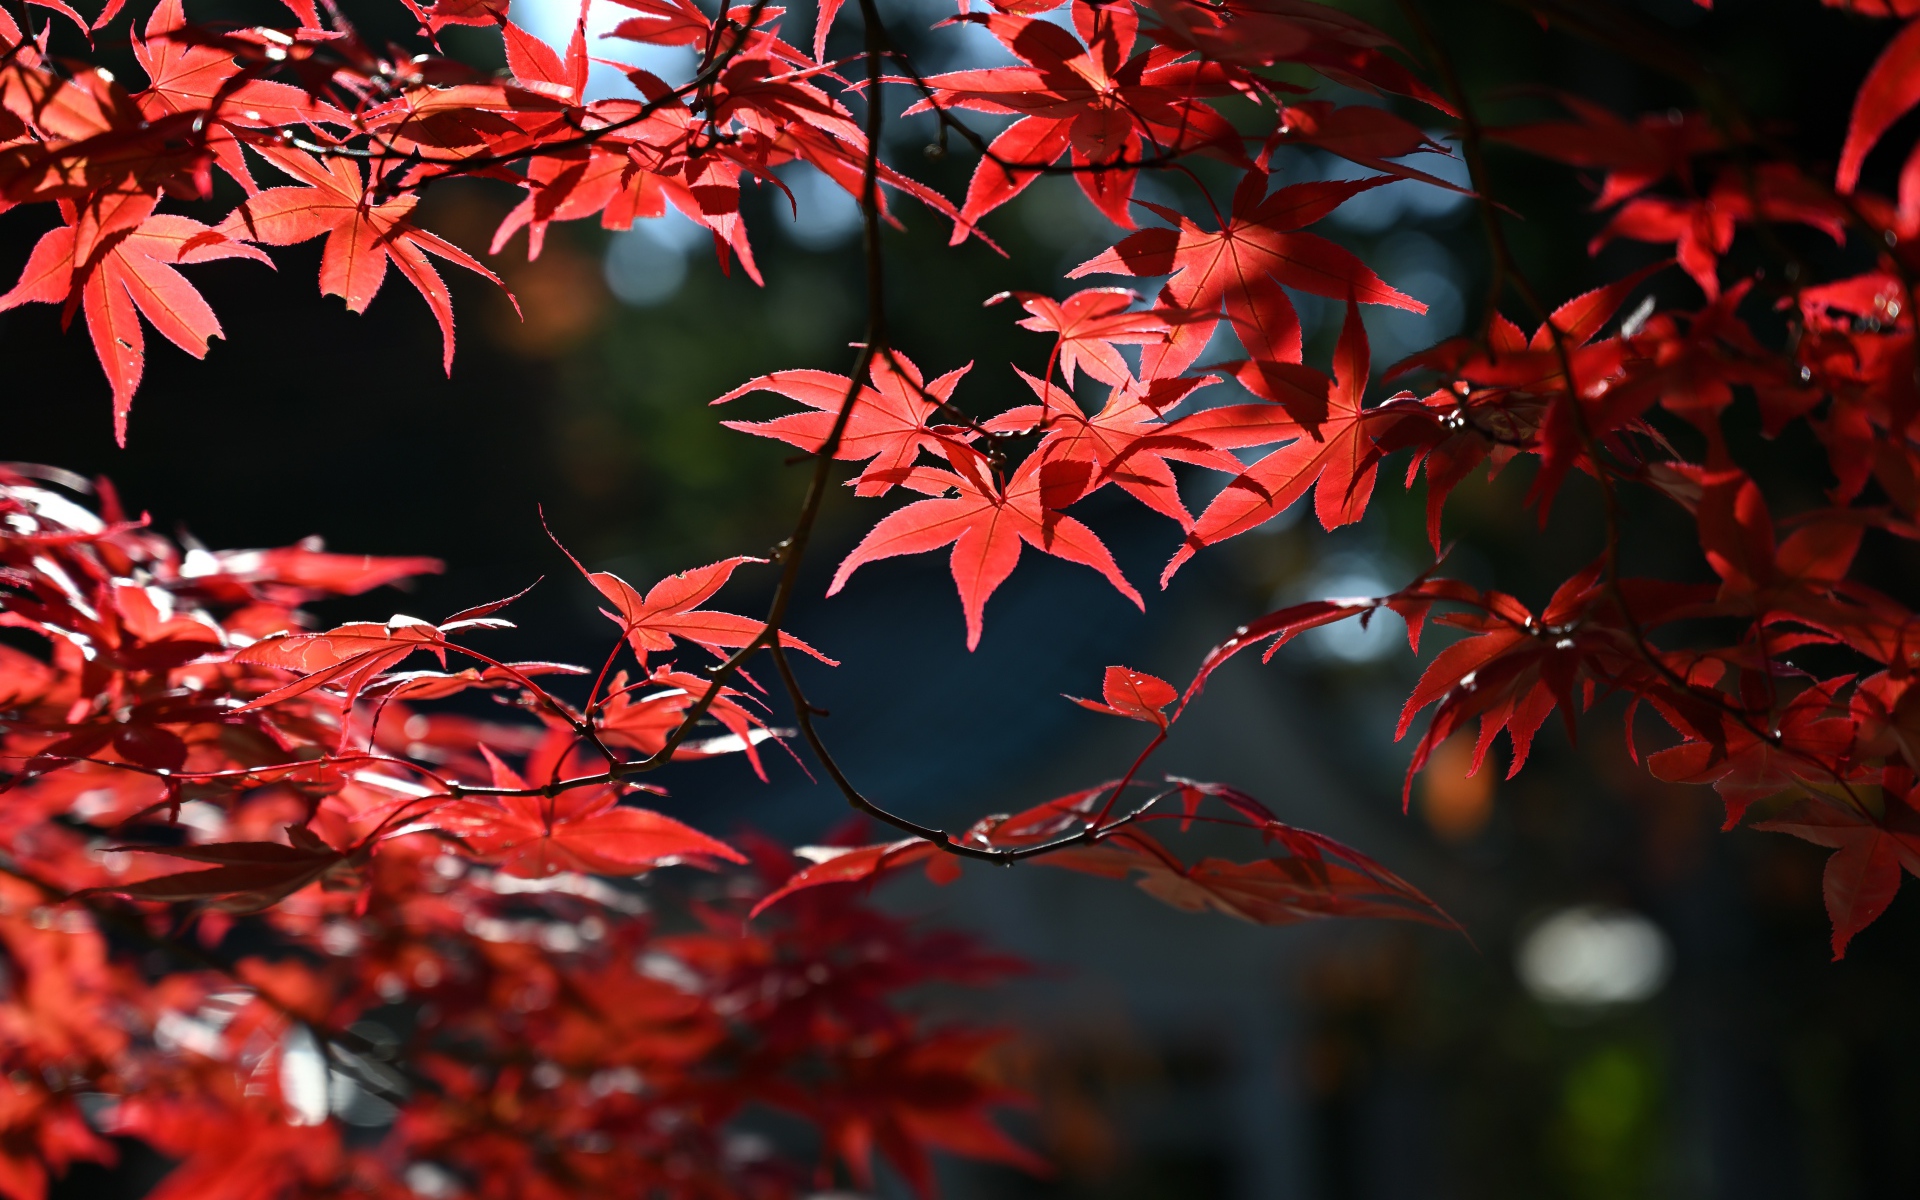 Red leaves in the sun on a tree in autumn